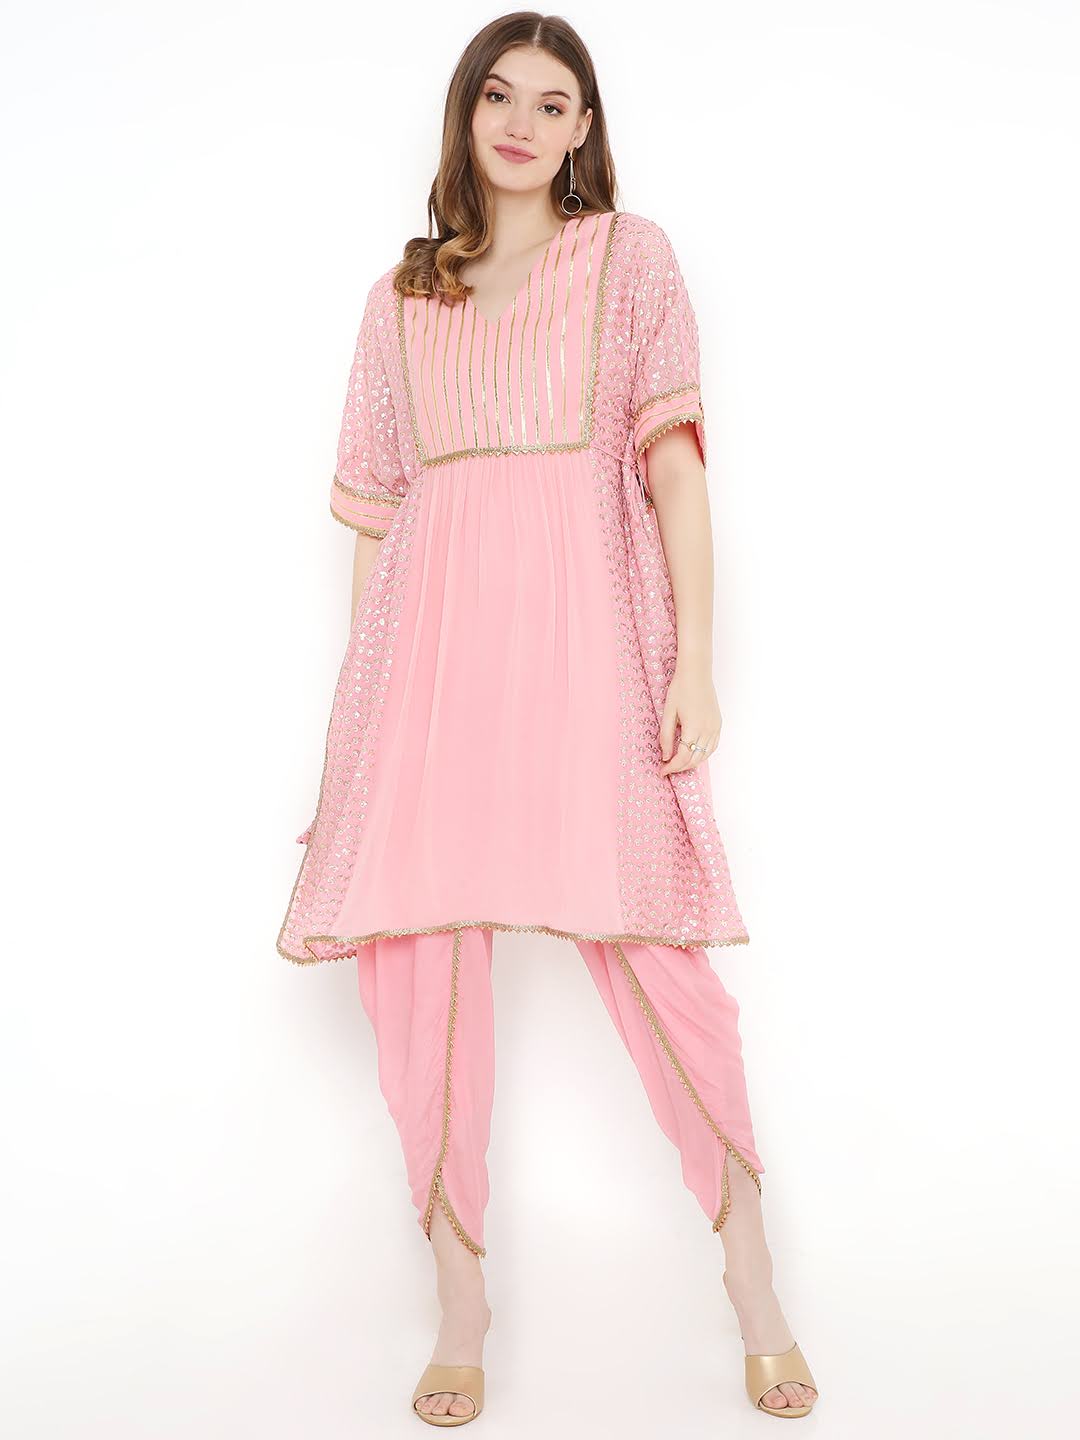 op-Kaftan with an embroidered panel with gota yoke details. - www.styletriggers.com